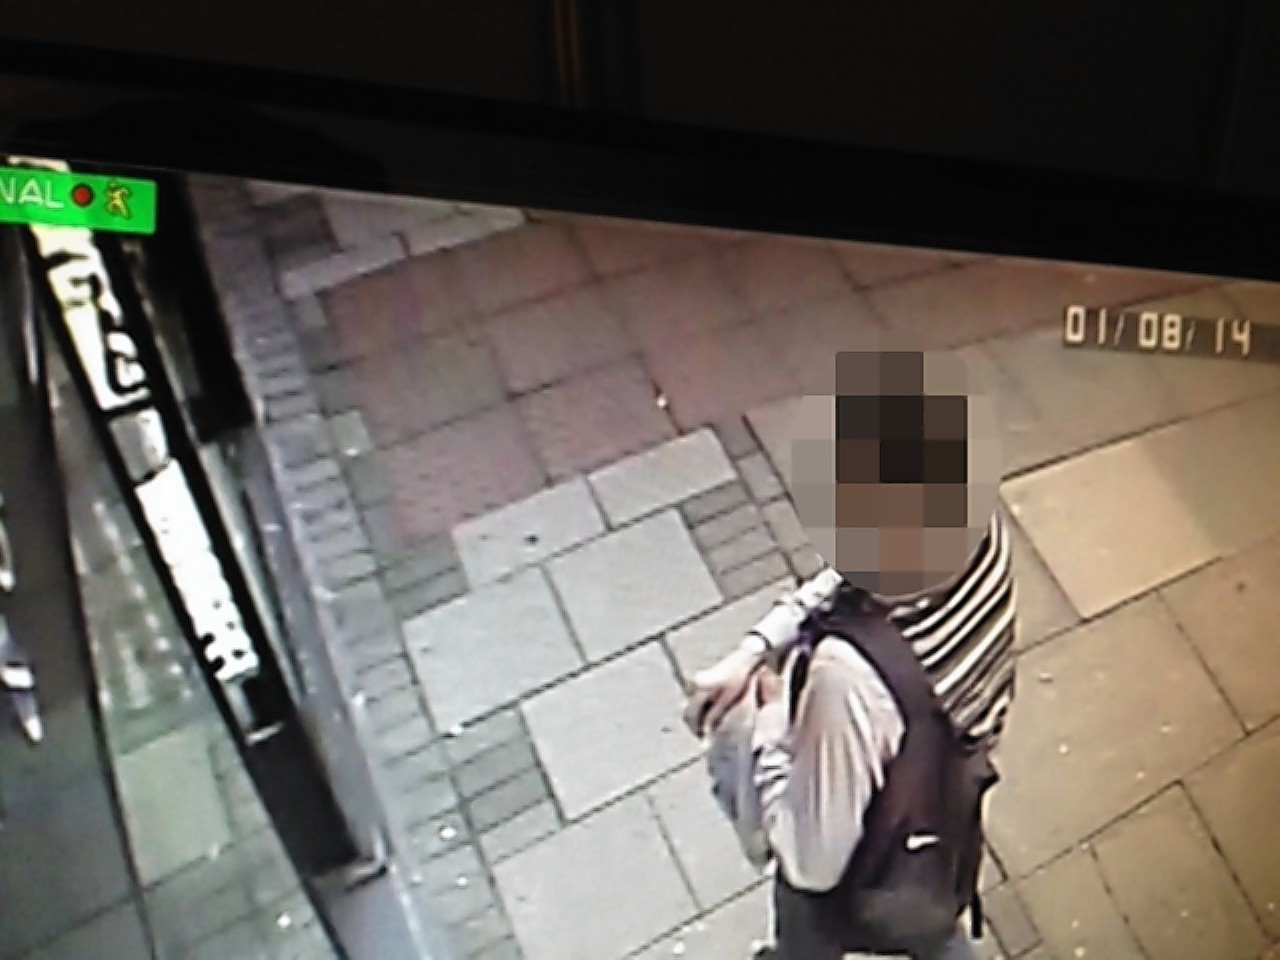 CCTV footage from outside the store